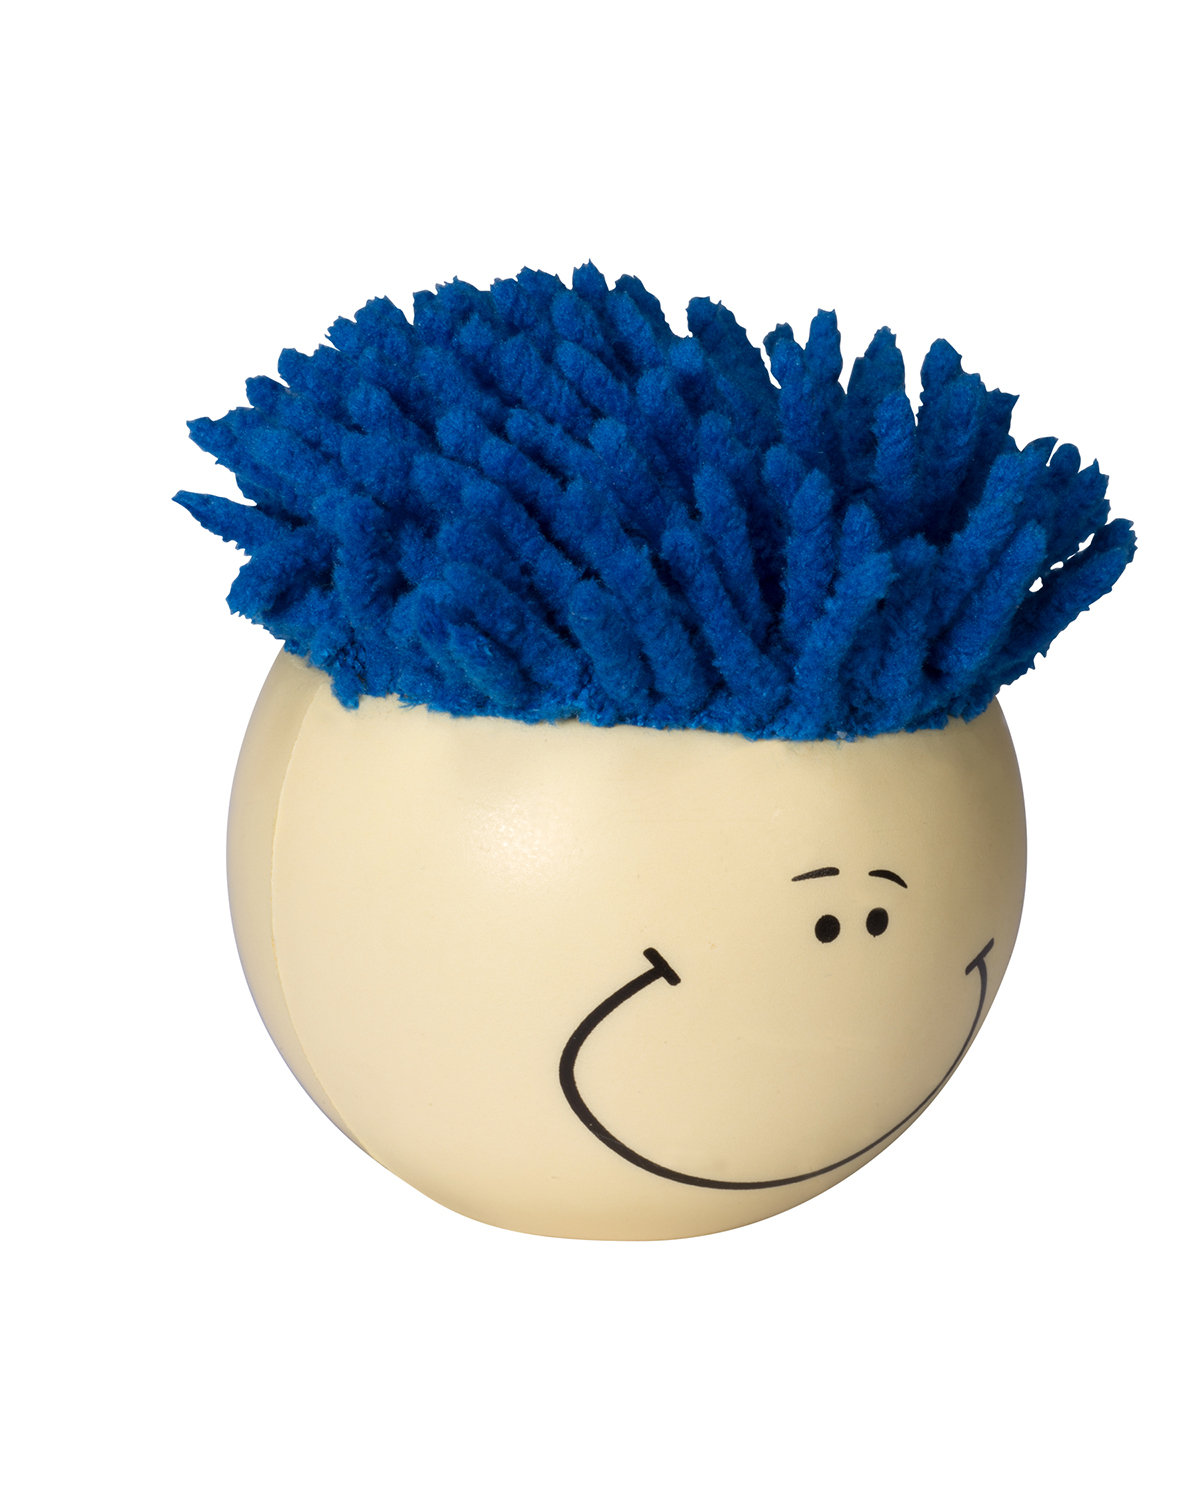 Smiling Multicultural Stress Ball-MopToppers